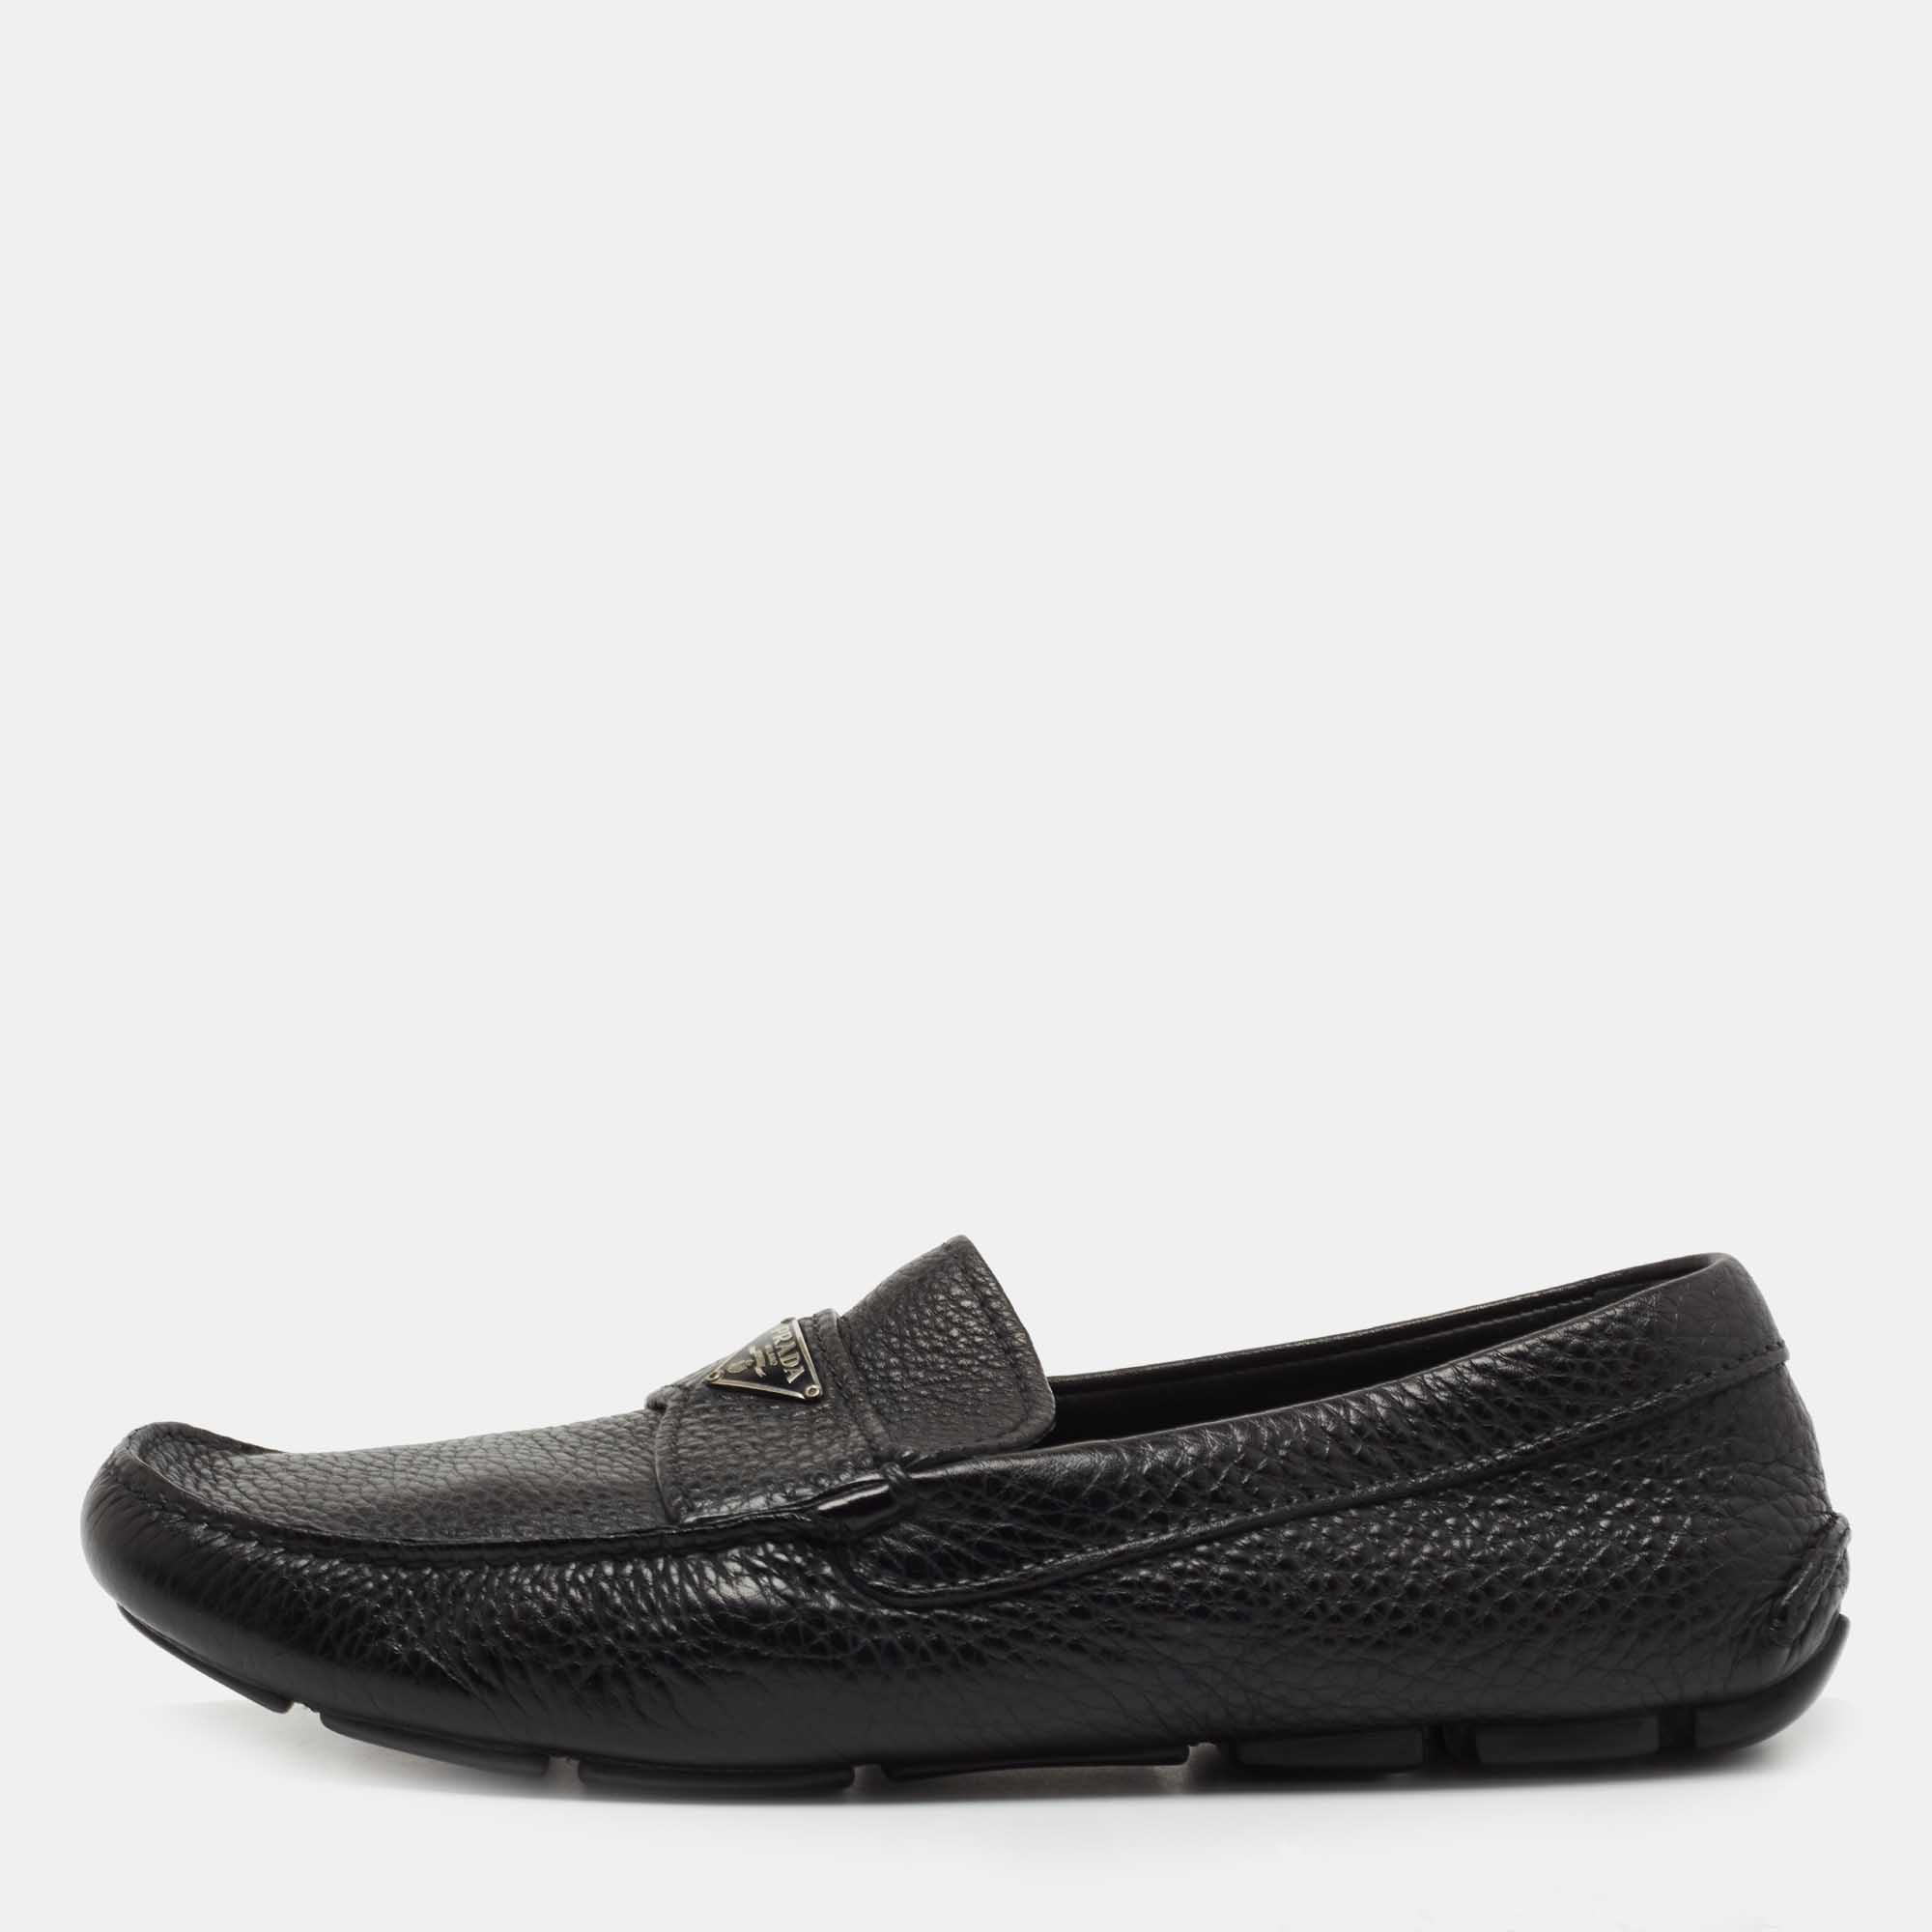 Pre-owned Prada Black Leather Slip On Loafers Size 41.5